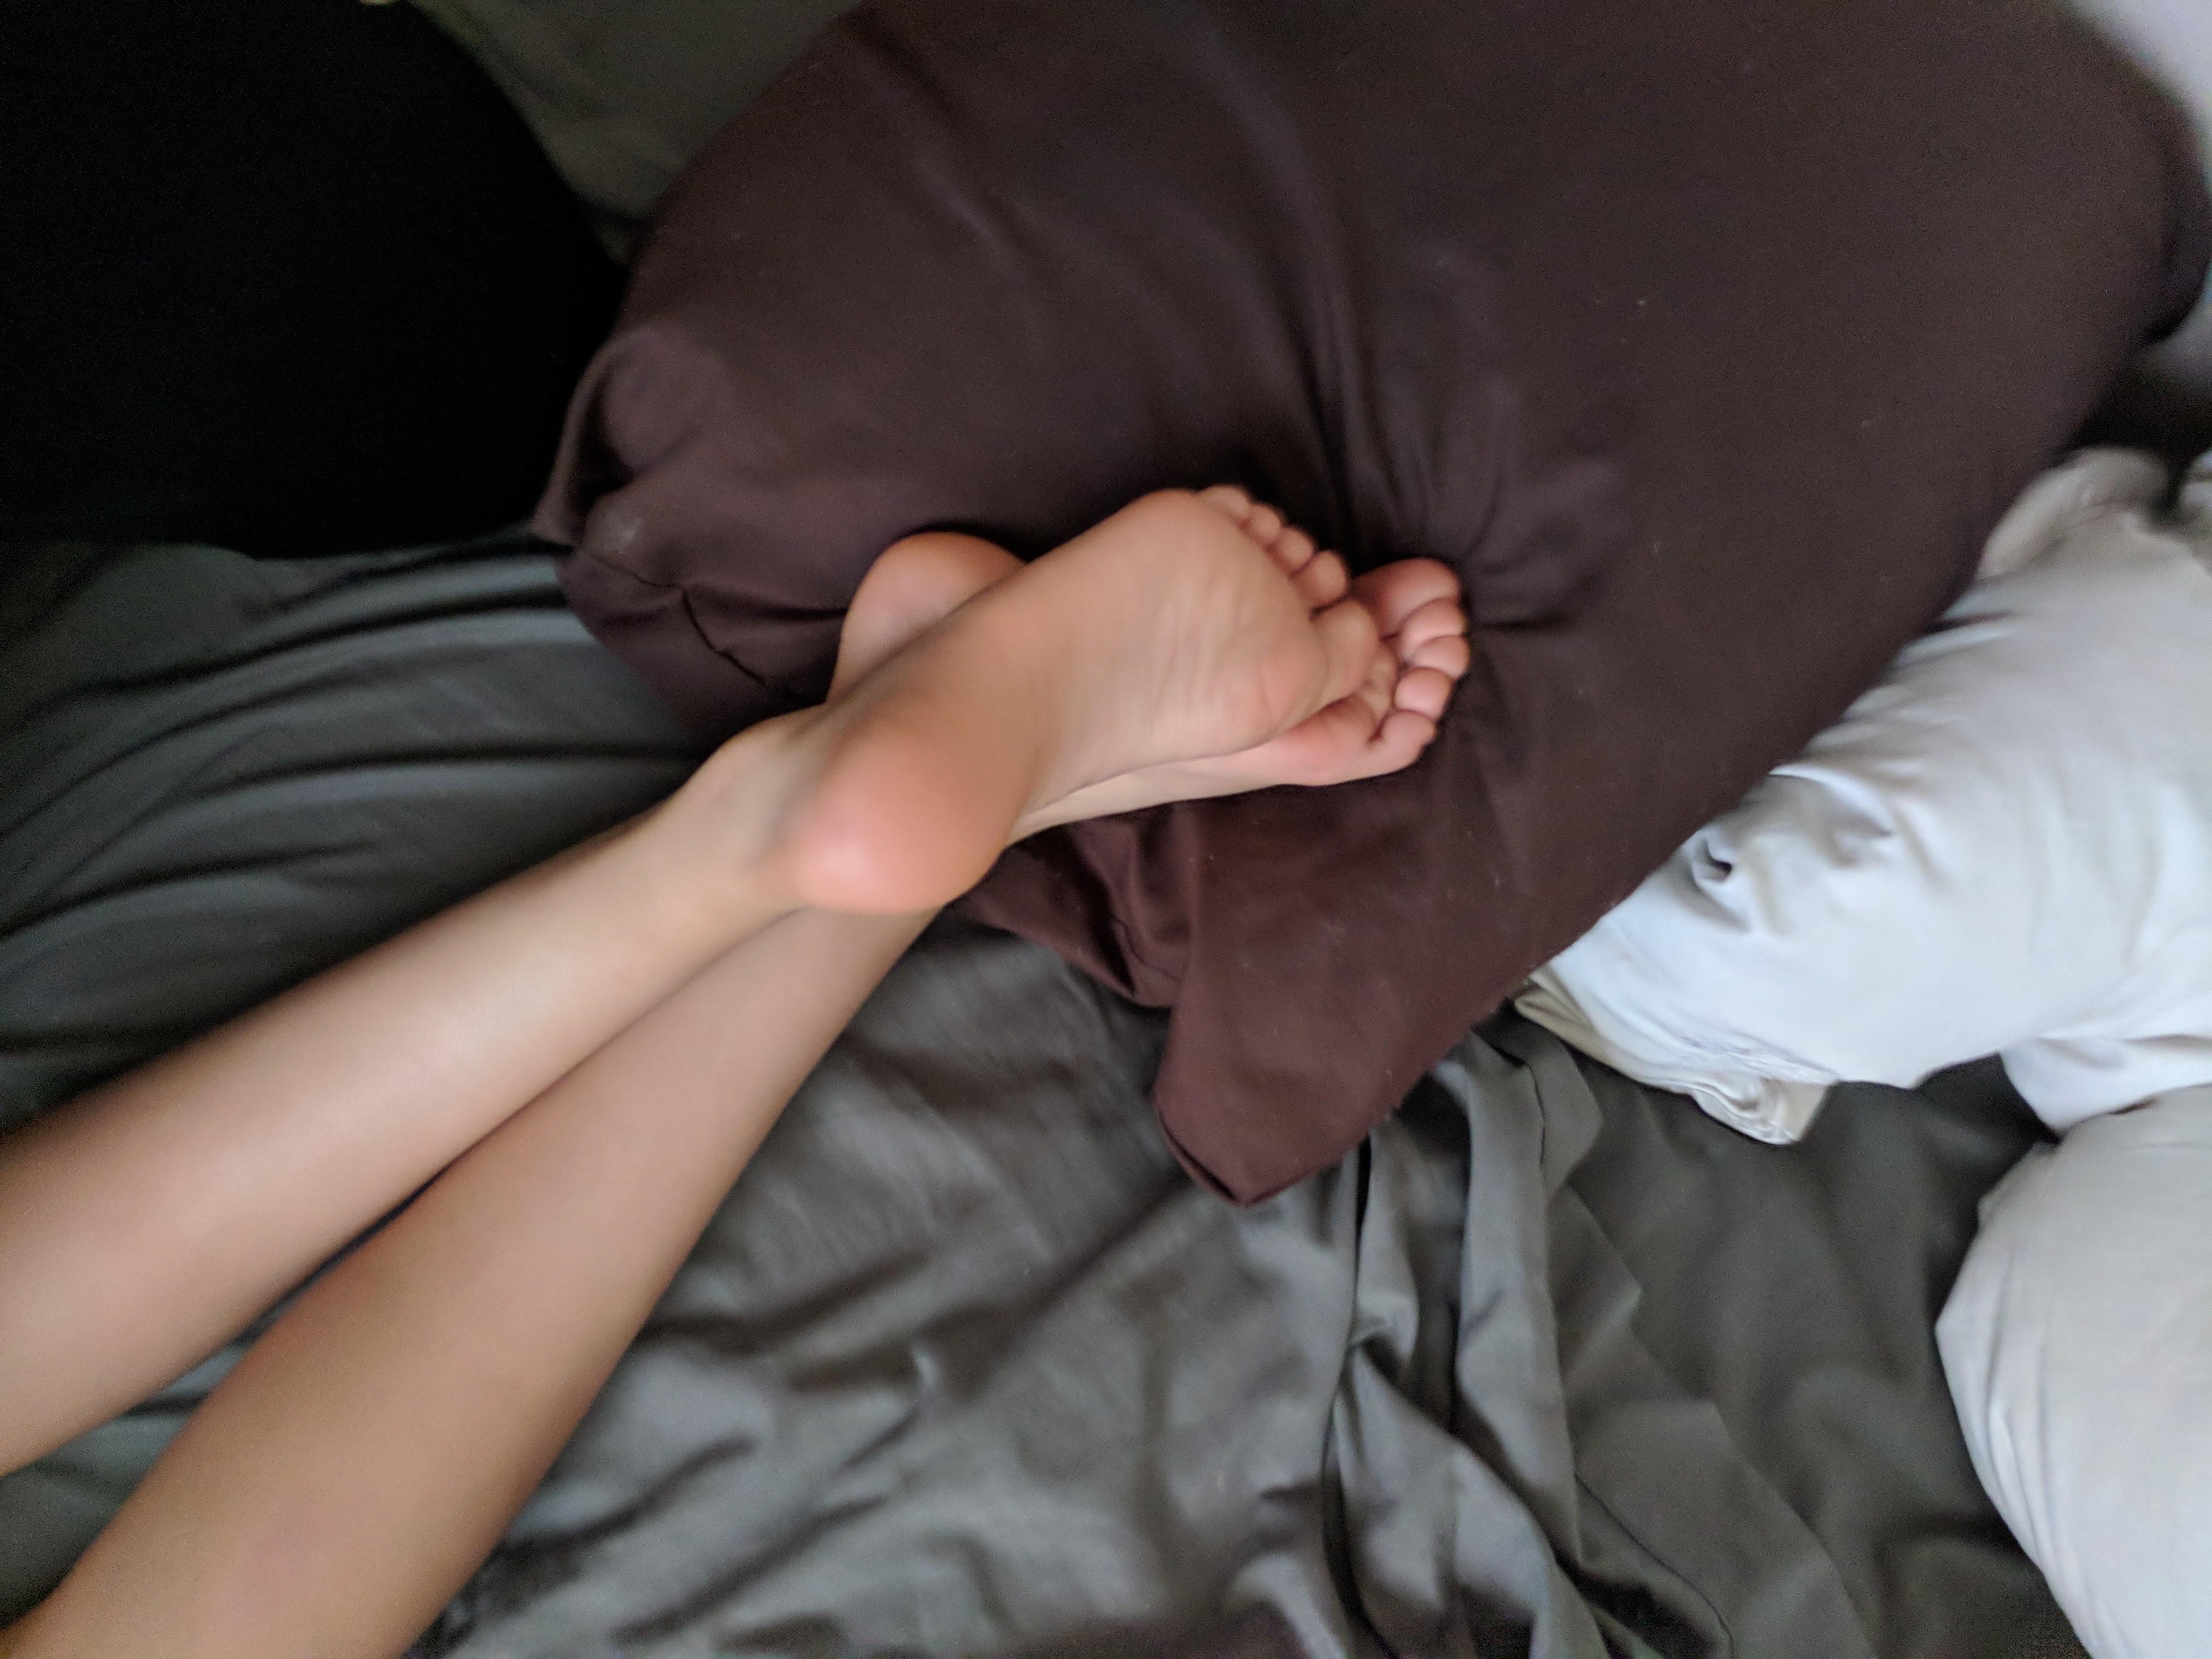 An old pic that someone took of my feet while i was sleeping, i think it looks cute, hope you guys enjoy 